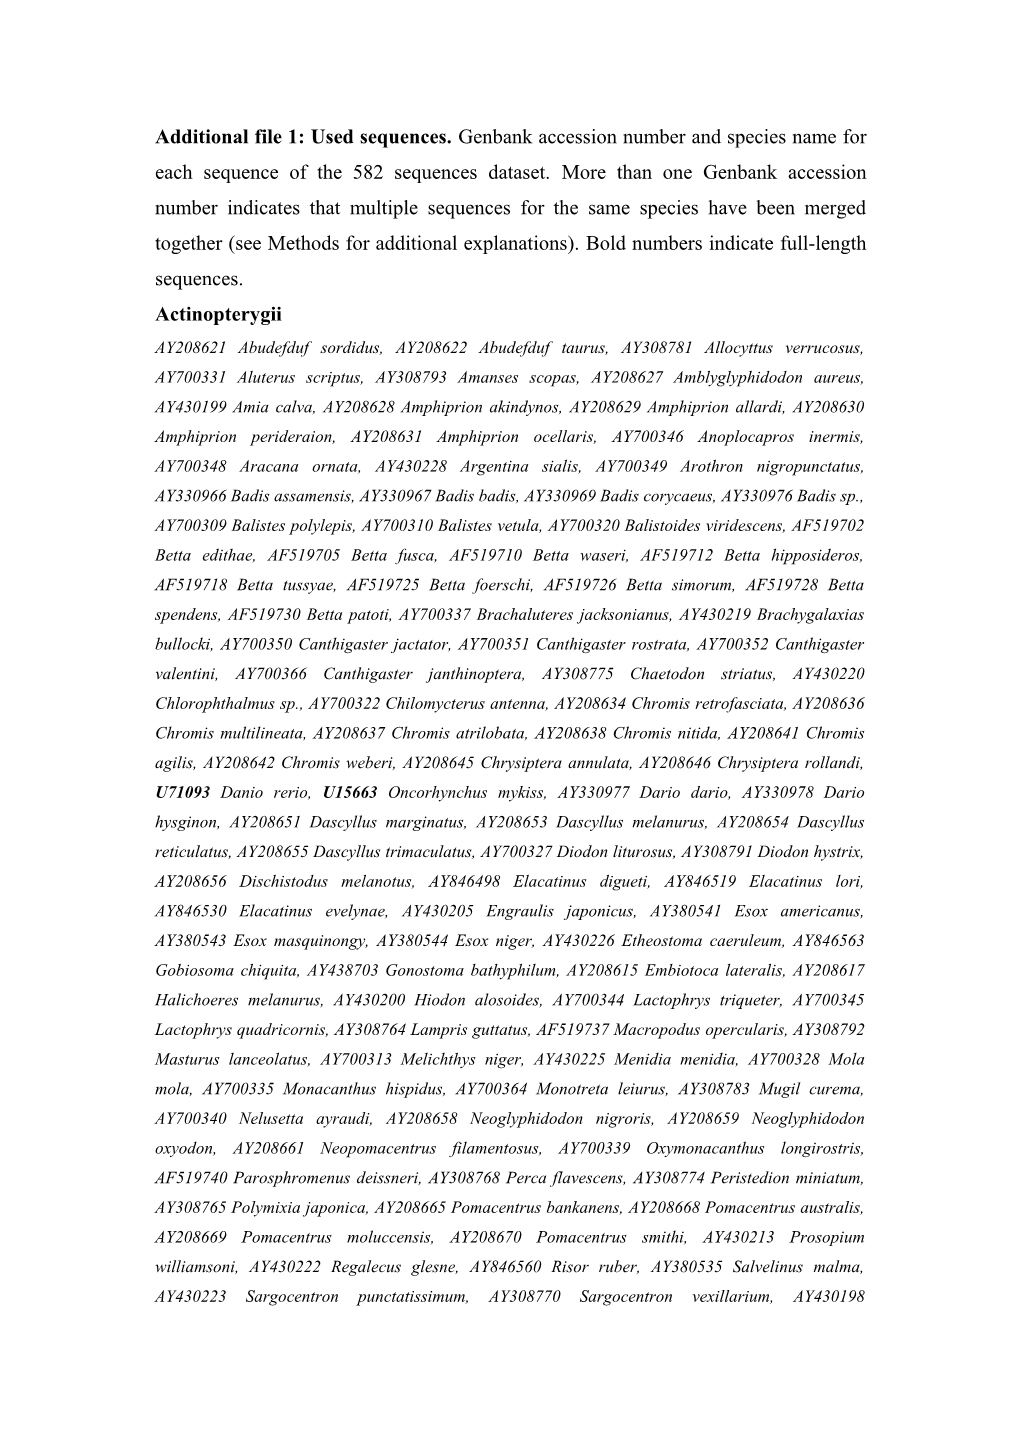 Additional File 1: Used Sequences. Genbank Accession Number and Species Name for Each